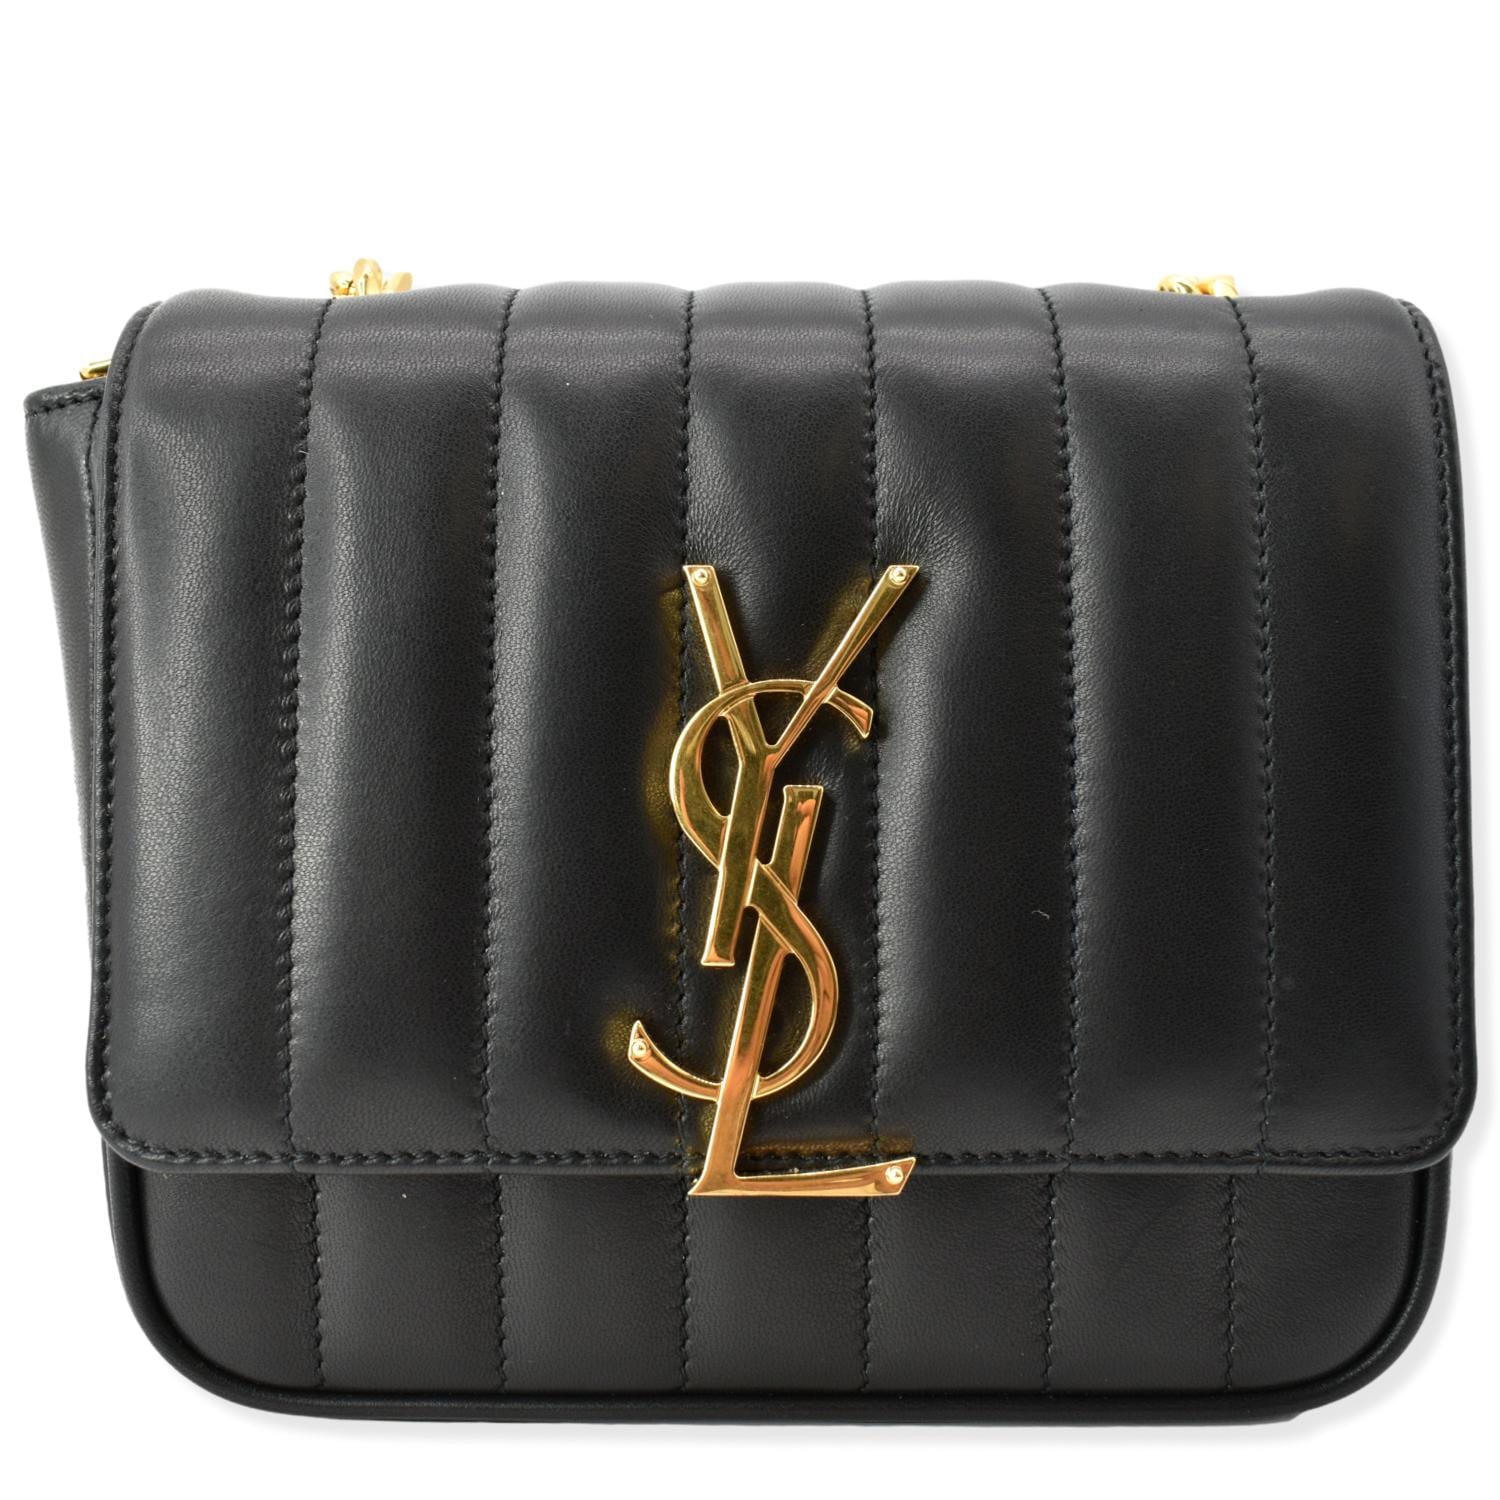 SAINT LAURENT Monogramme quilted leather pouch  Leather pouch, Quilted  leather, Monogrammed pouch